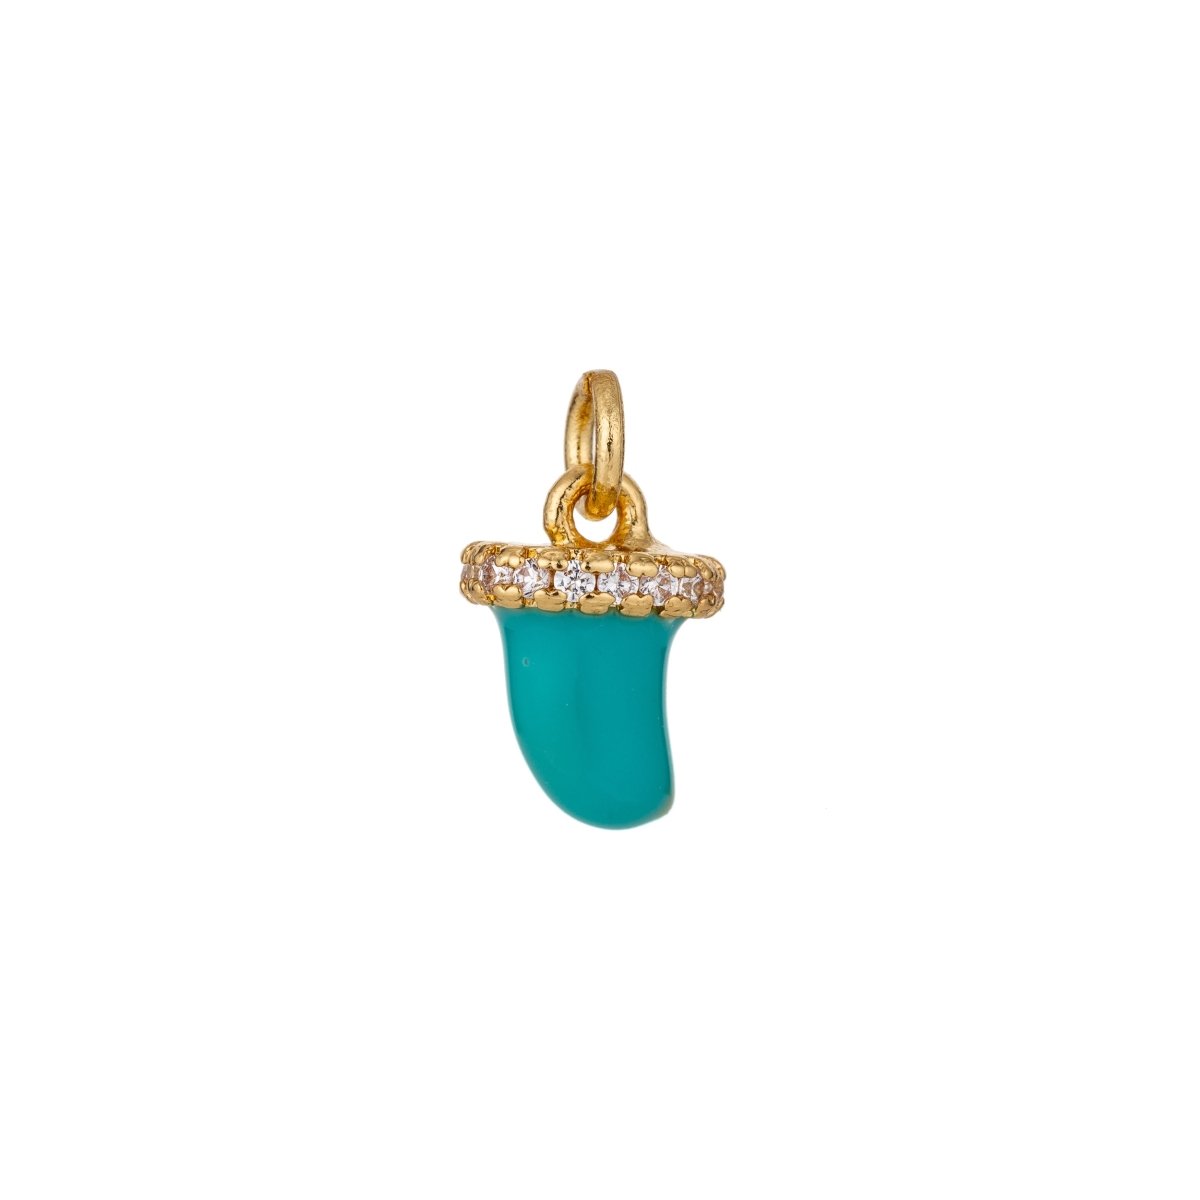 Delicate Mini Tusk Drop Charm Pendant, Dainty Horn Turquoise Charms with CZ for Bracelet Earring Necklace Jewelry Making Supply in Gold Fill C-433 - DLUXCA